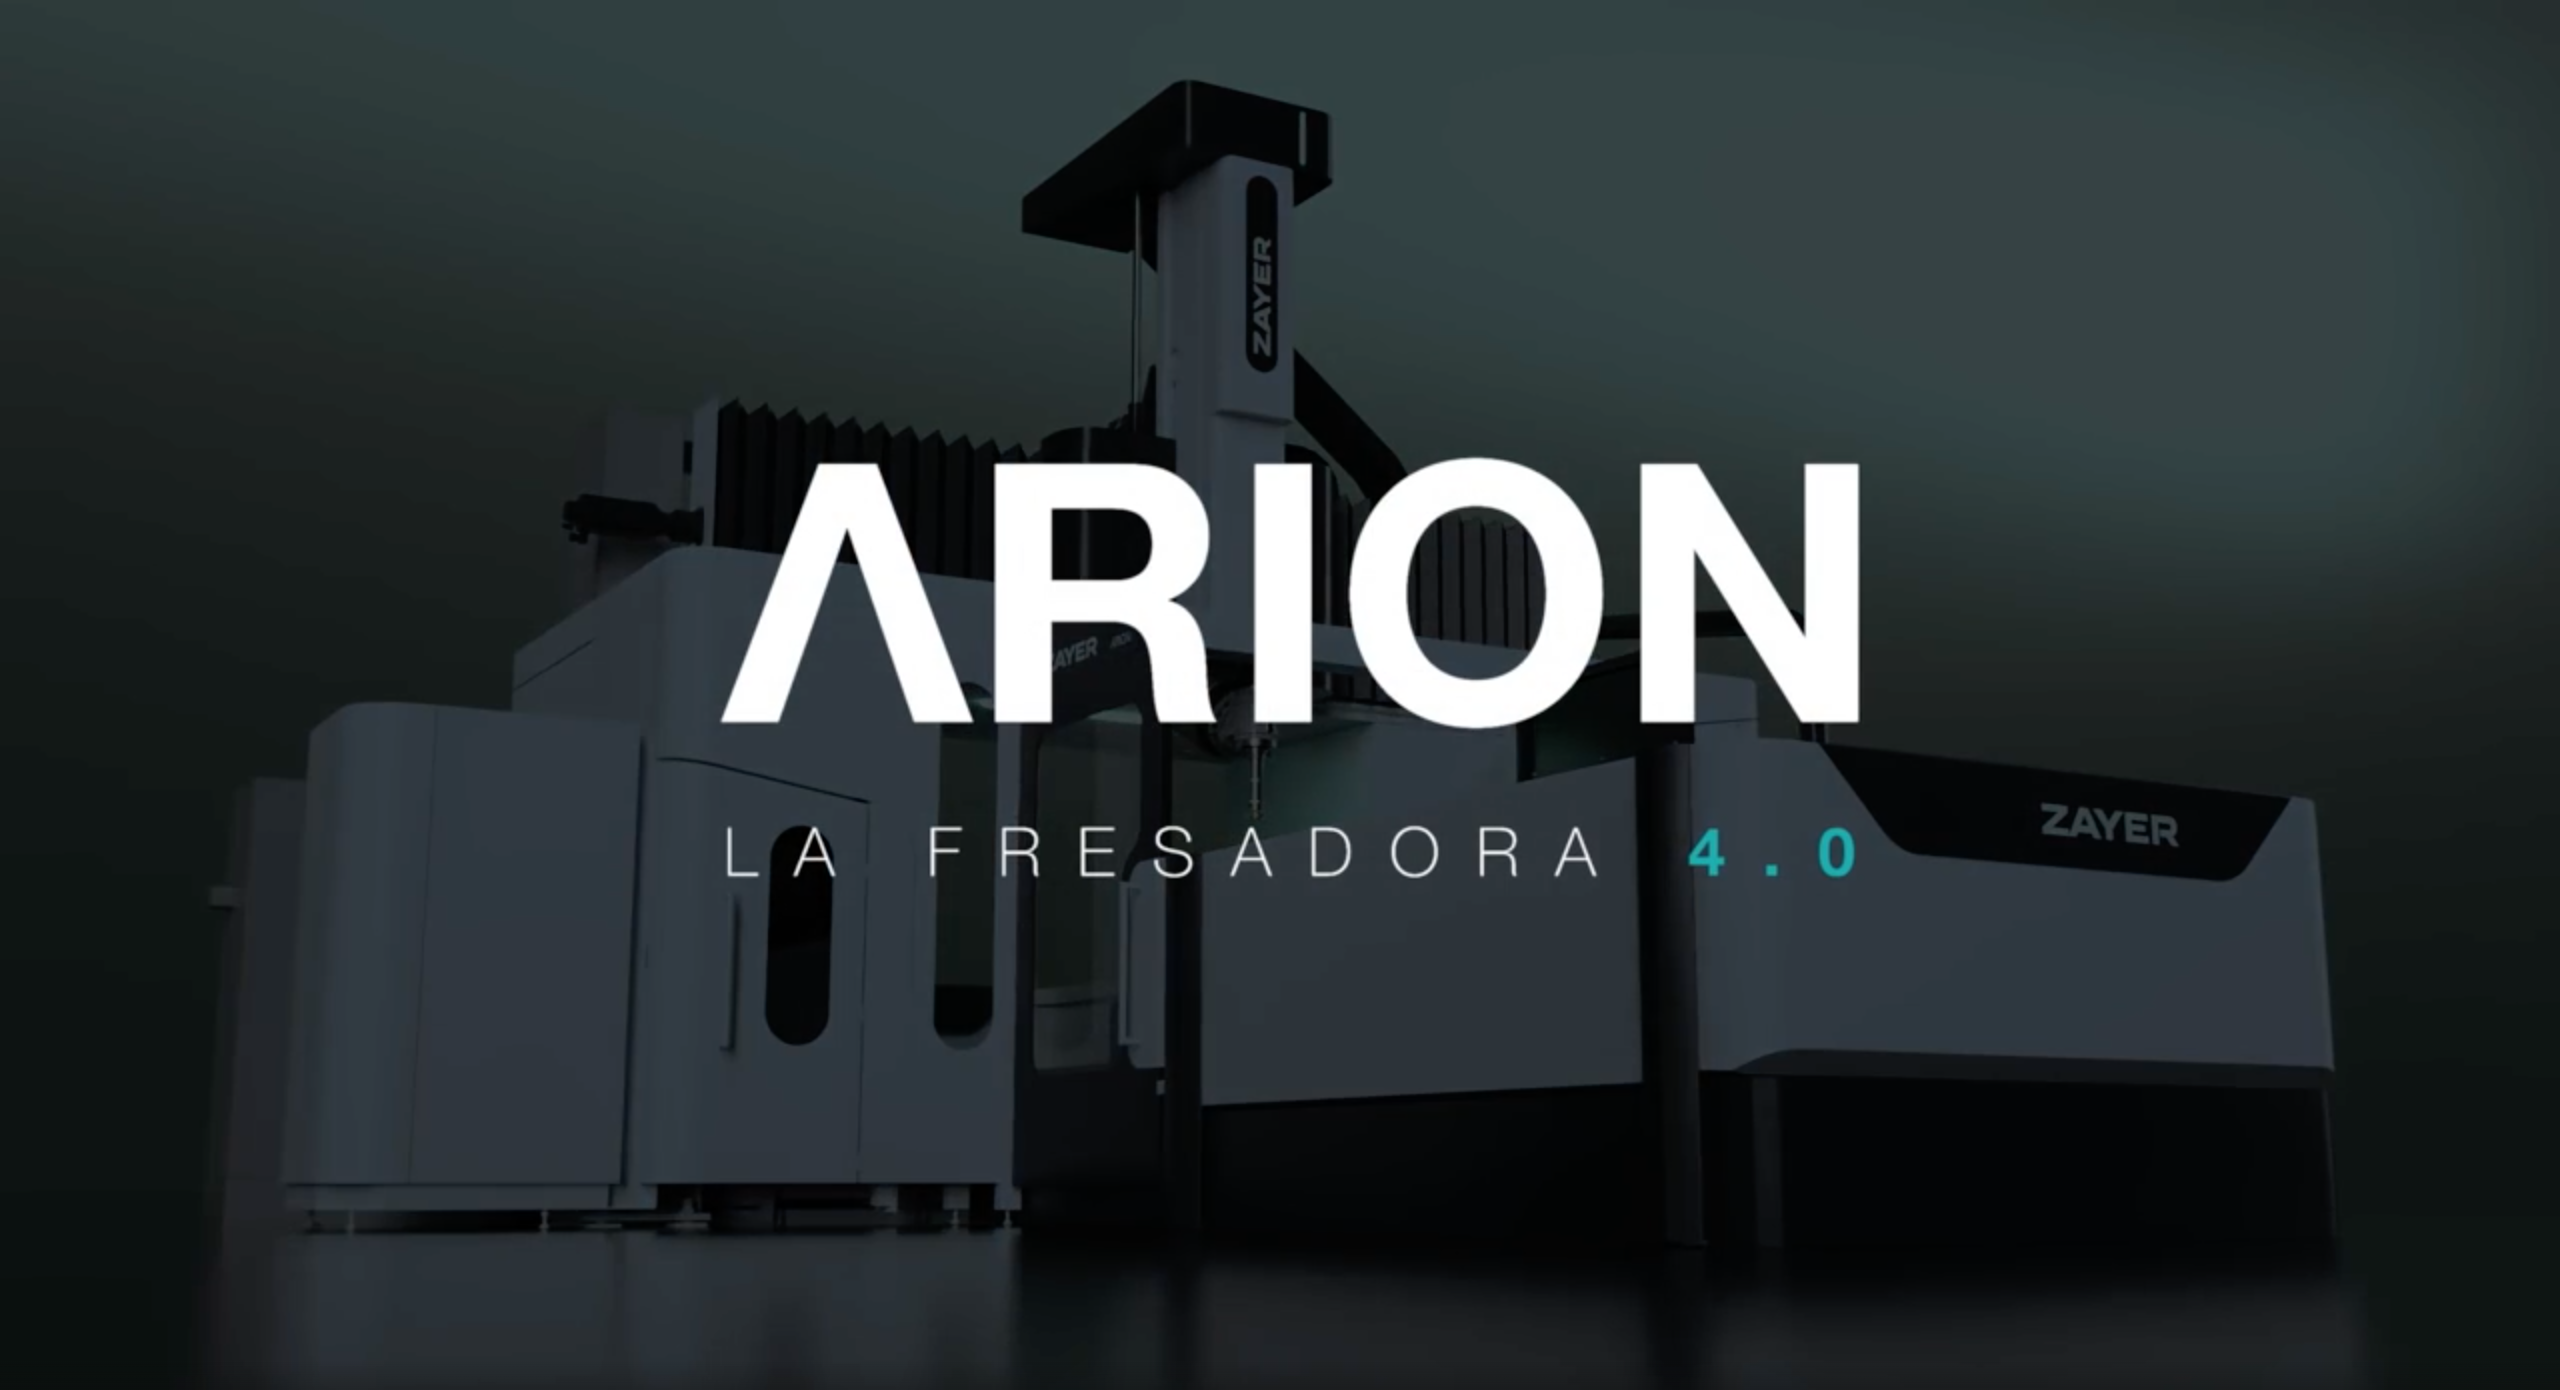 ARION THE MILLING MACHINE 4.0